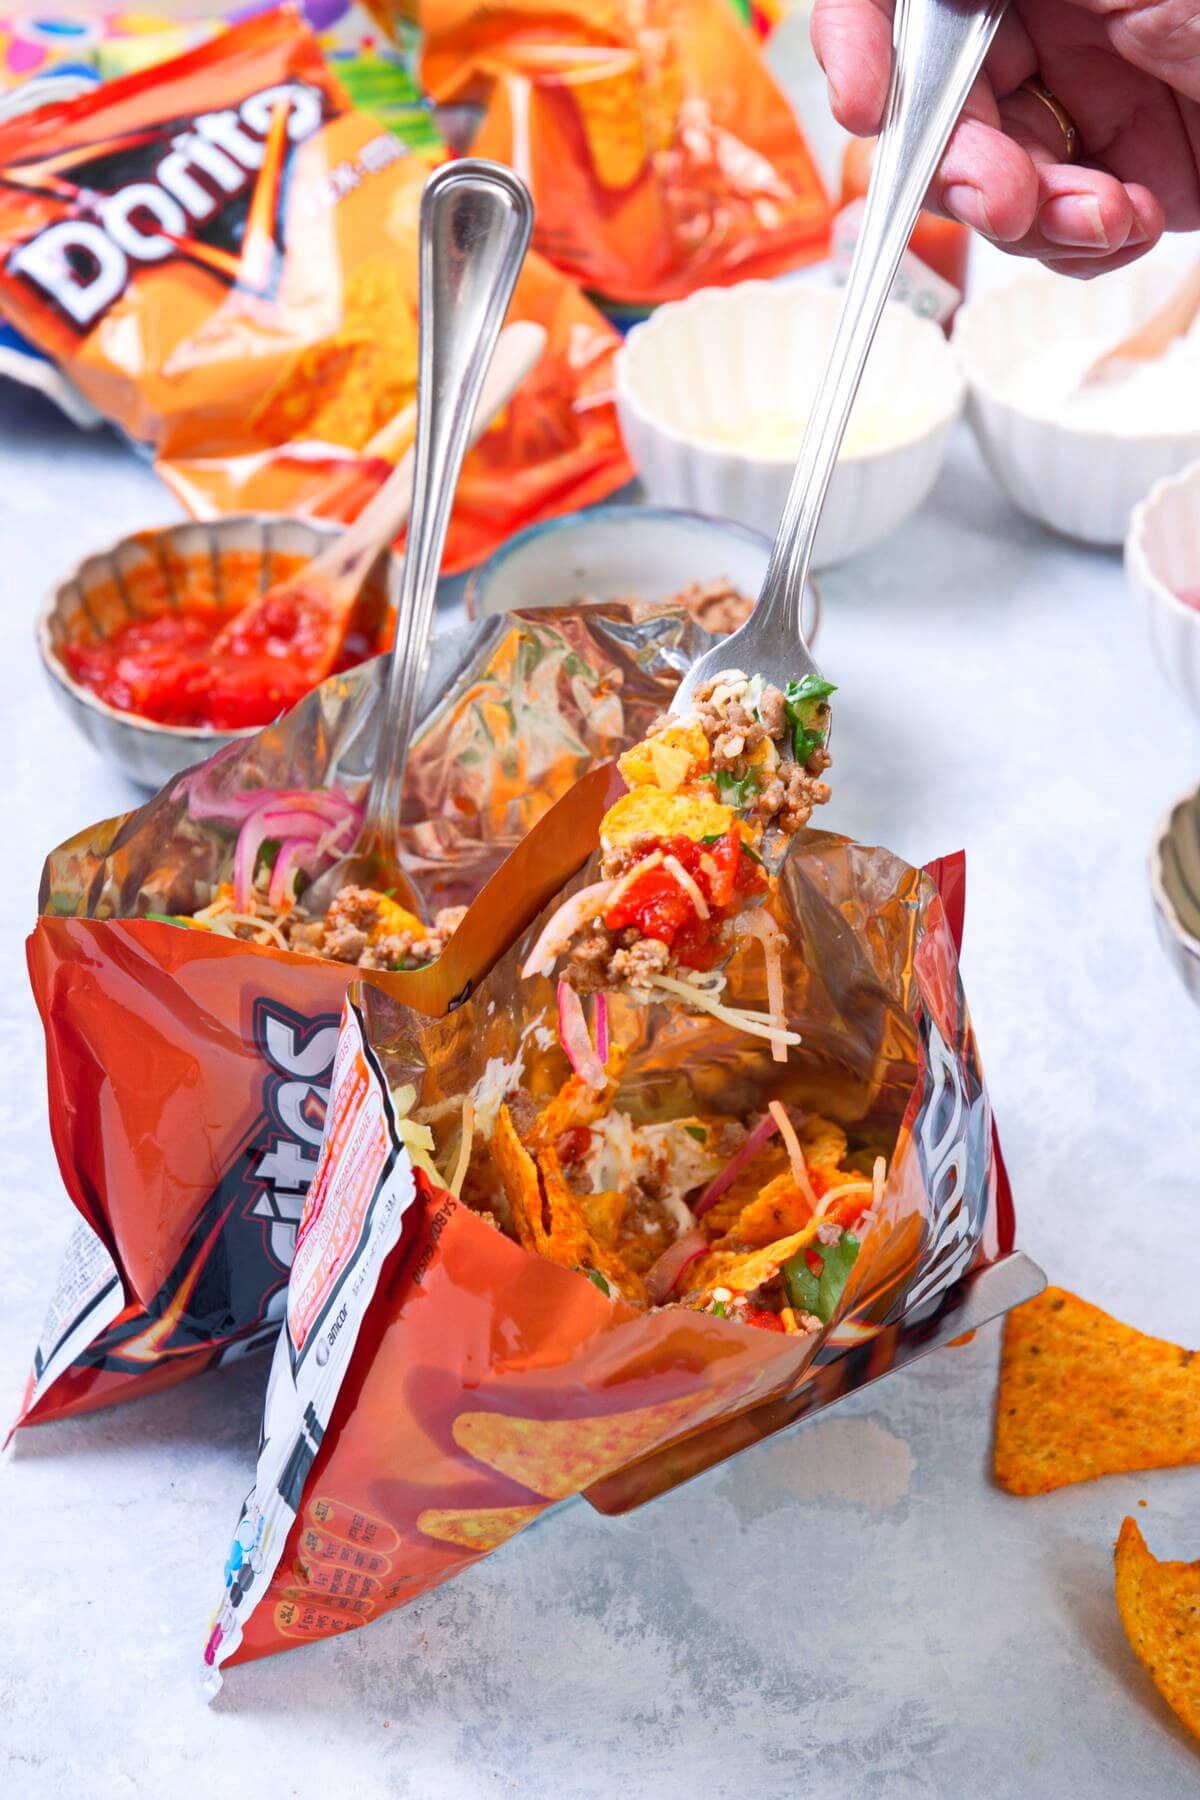 Taco in a bag with forks and toppings in the background.